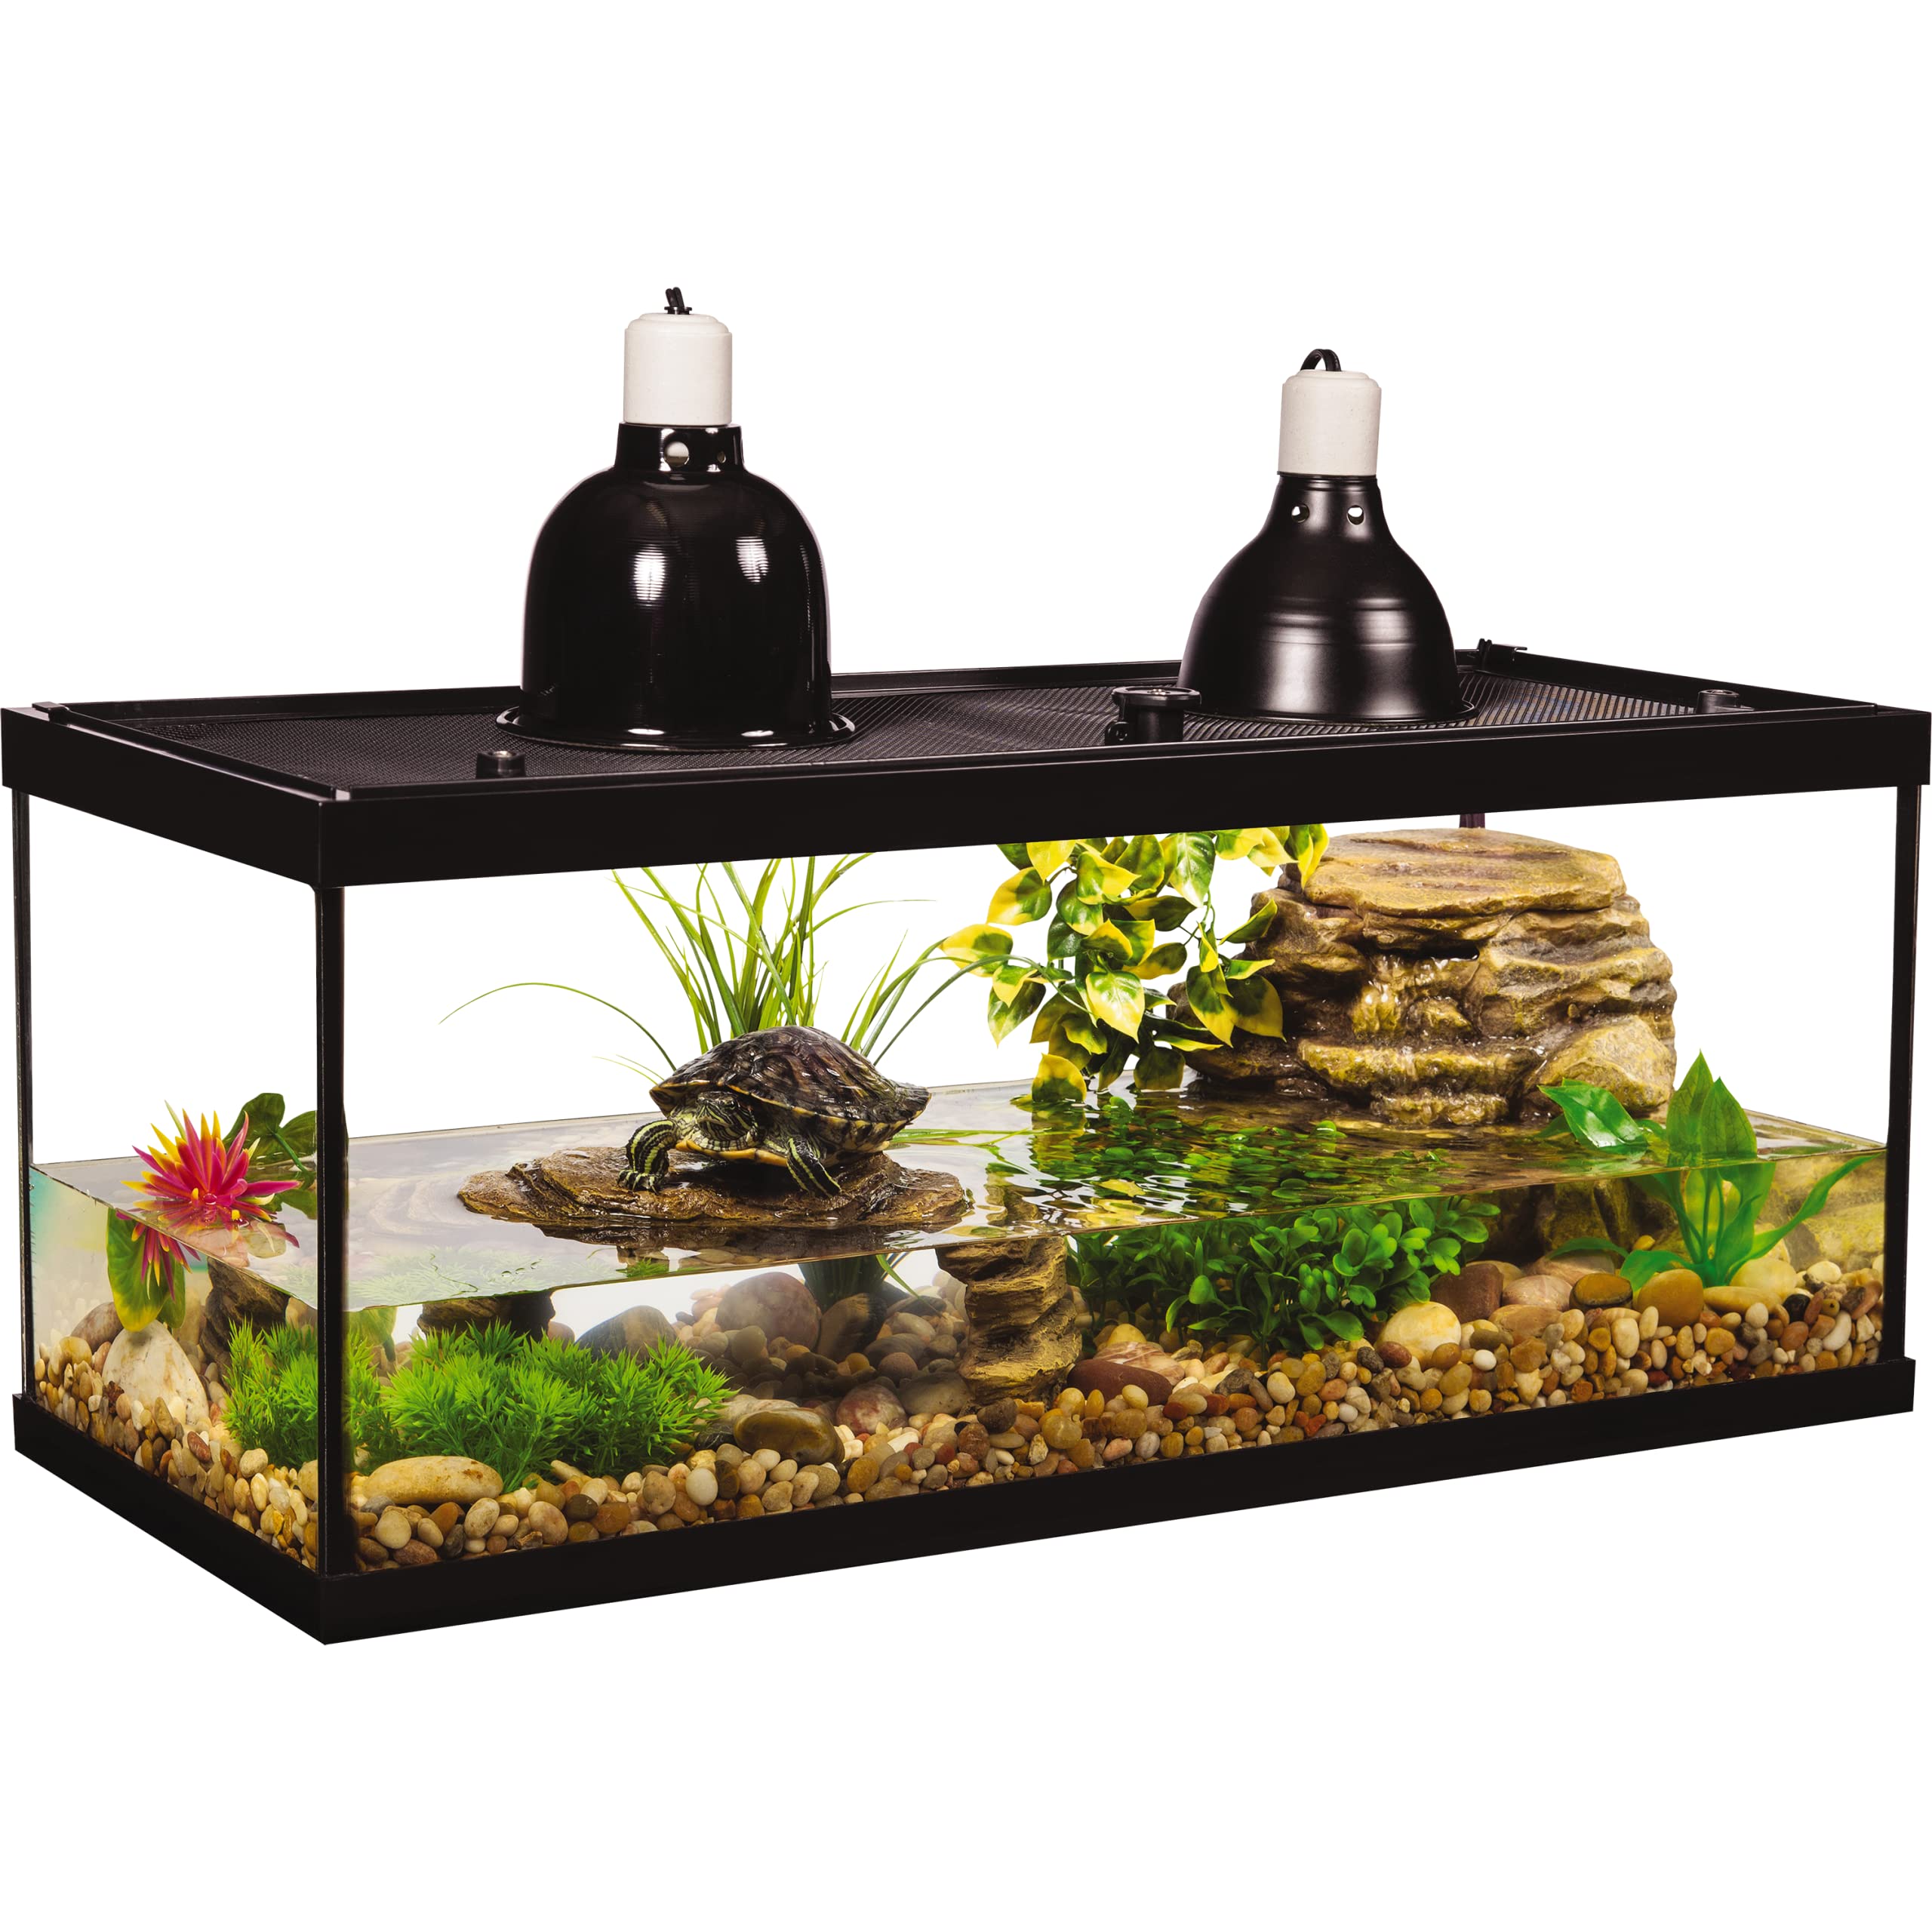 Tetra Deluxe Aquatic Turtle Kit - 20 Gallons, Filter, Heating Lamps (NV33230)